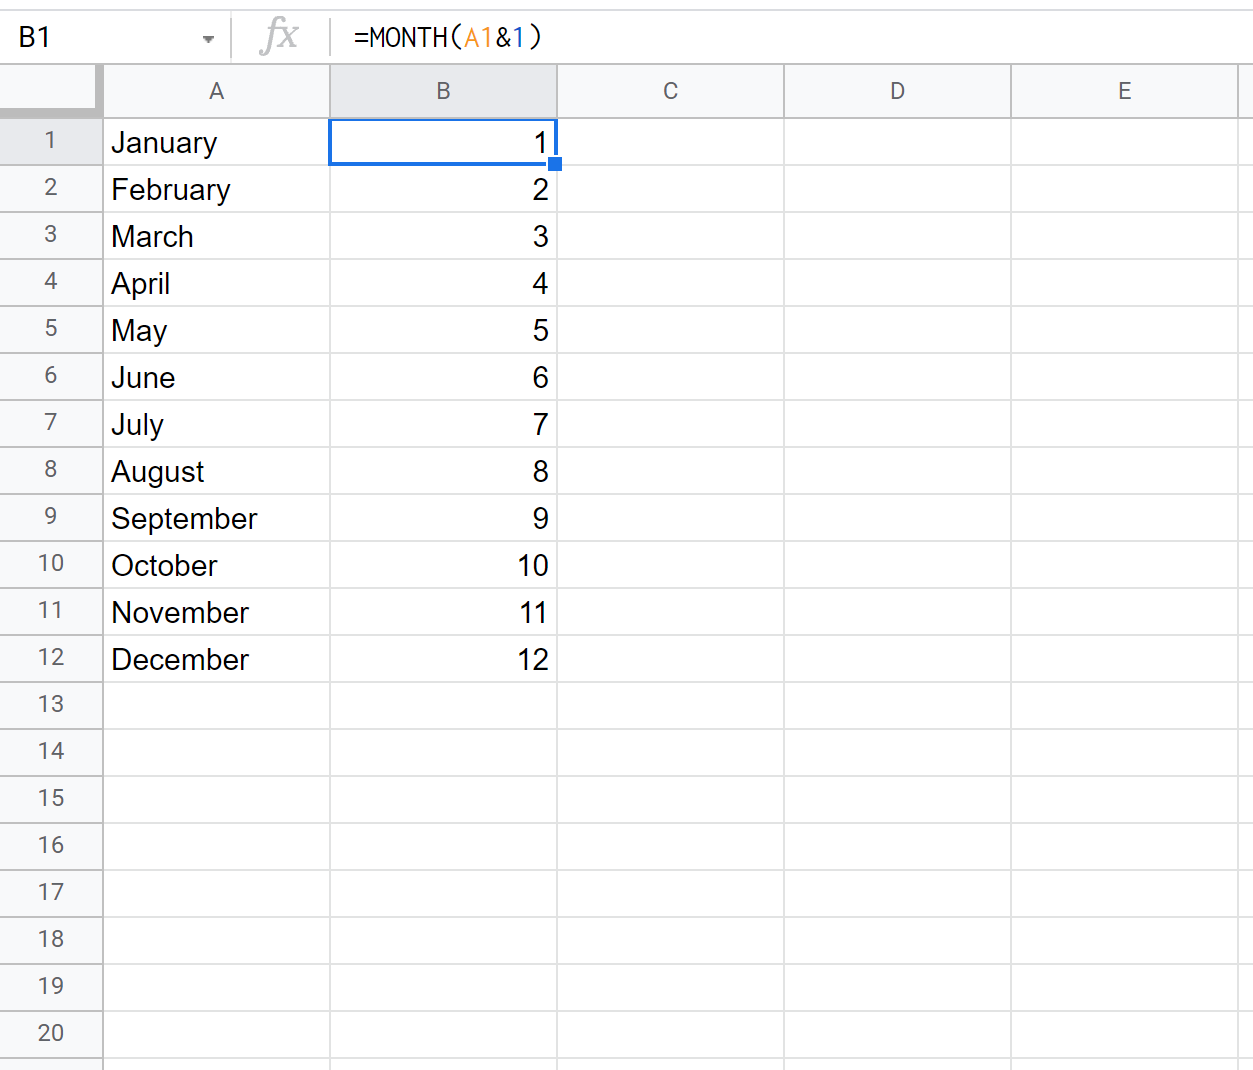 convert month name to month number in Google Sheets